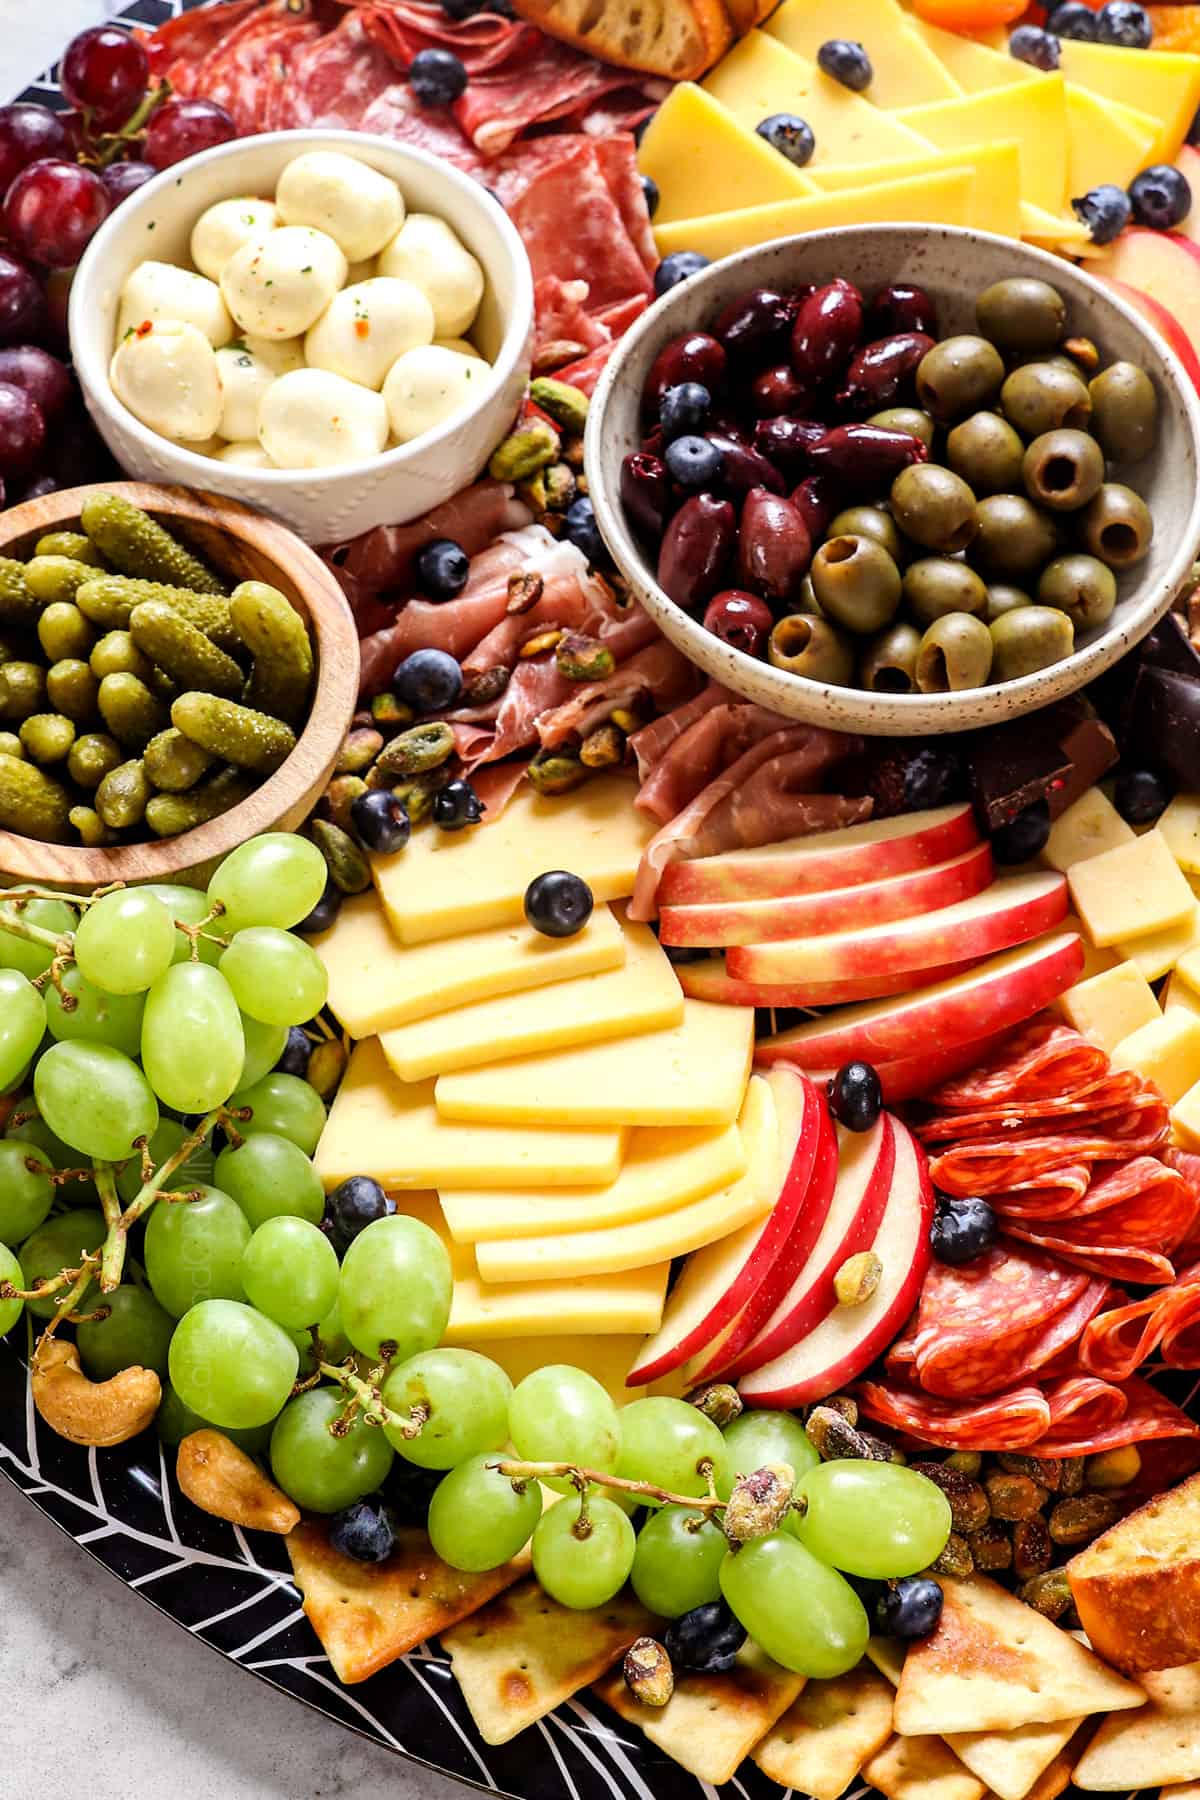 up close of a simple charcuterie board with cheeses, apples, grapes, meats and cheeses